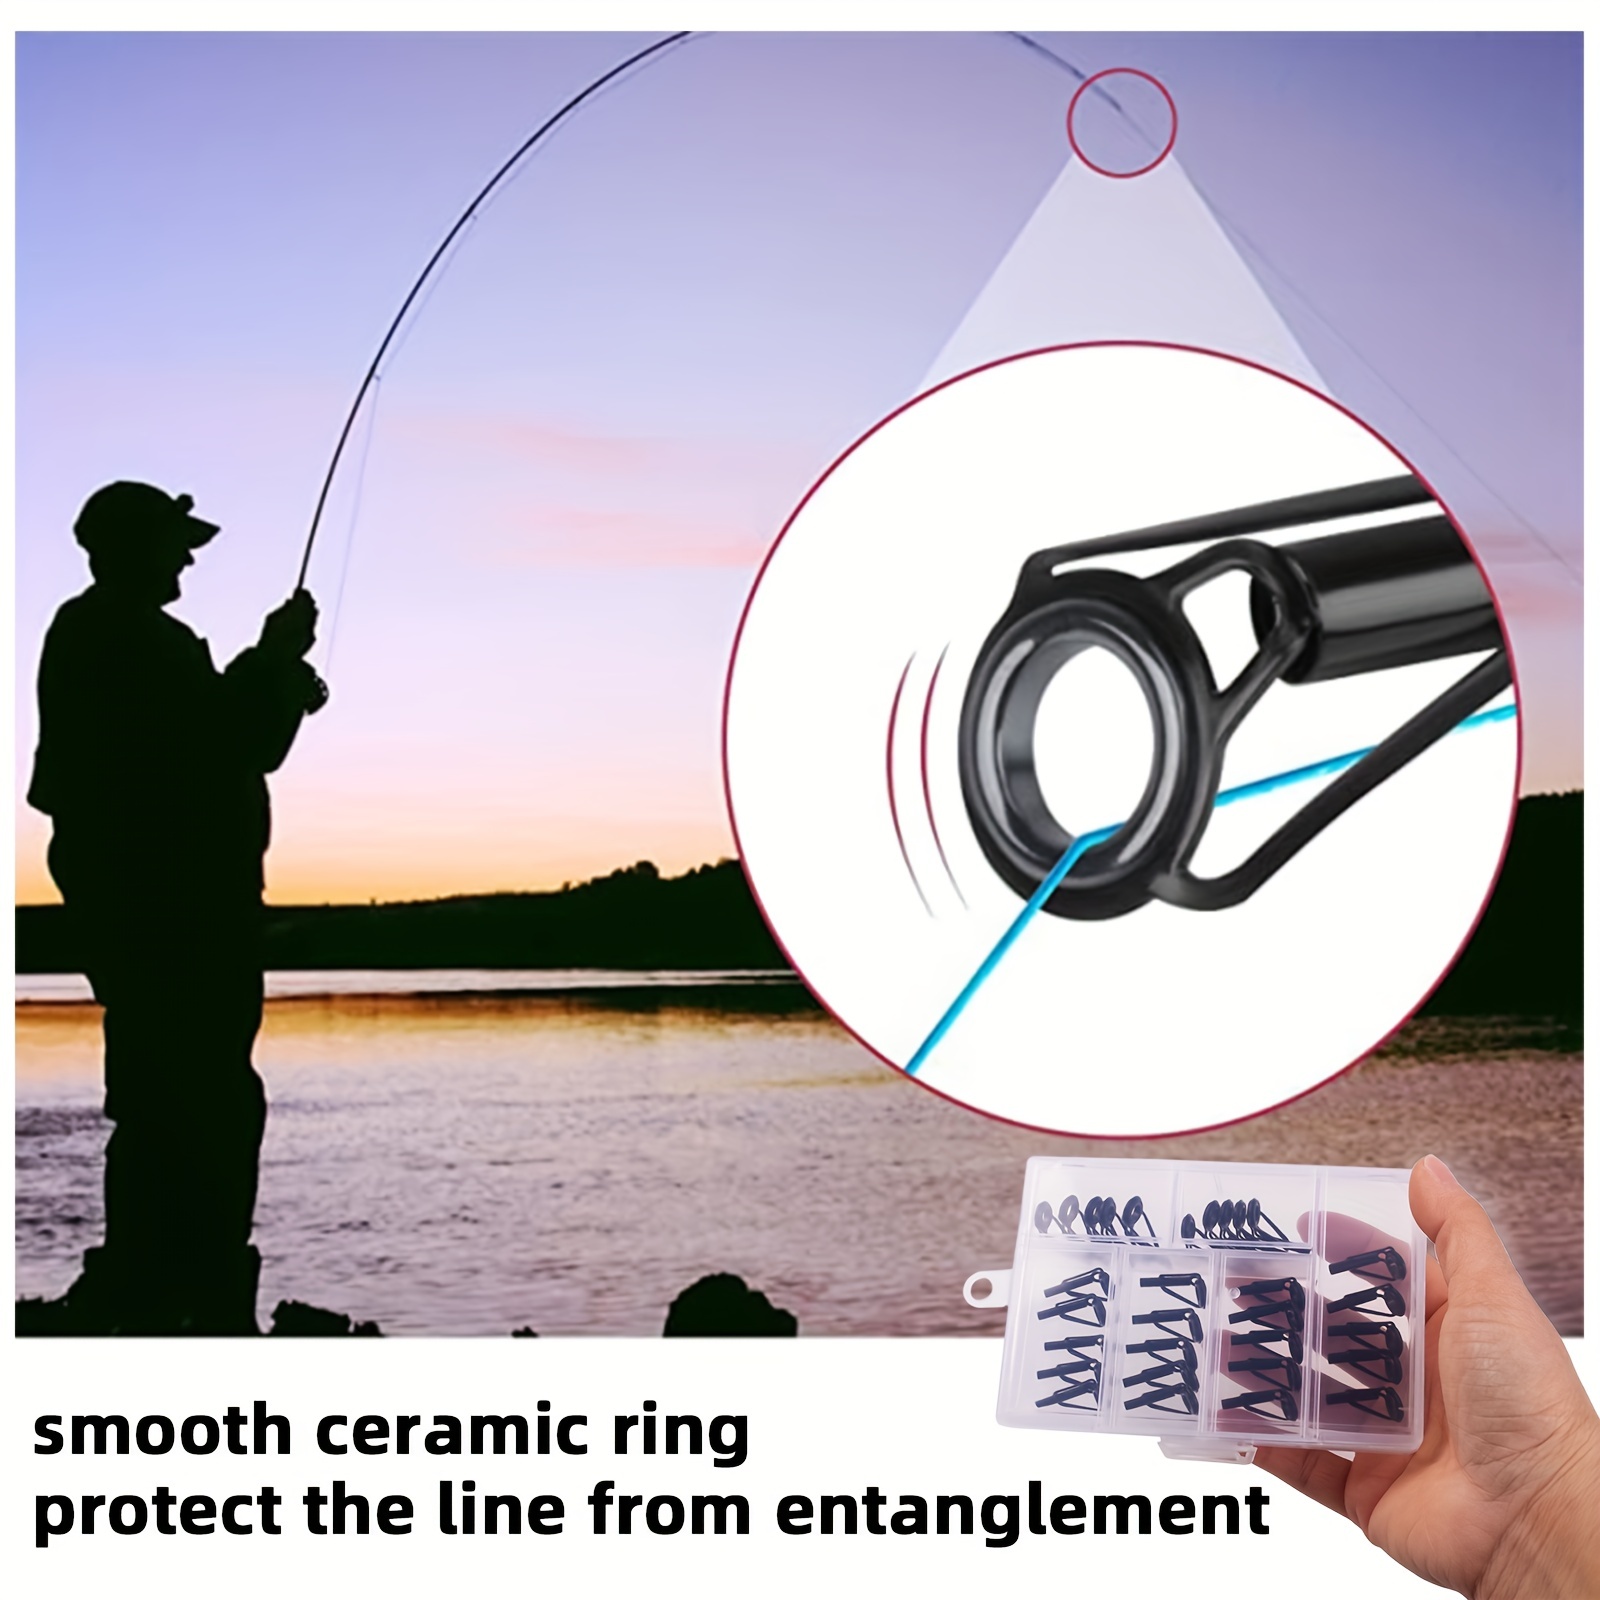 9KM DWLIFE Fishing Rod Tip Repair Black Stainless Steel Ceramic Ring Guide  Replacement Kit Mixed Size in a Box, Reel Care Accessories -  Canada